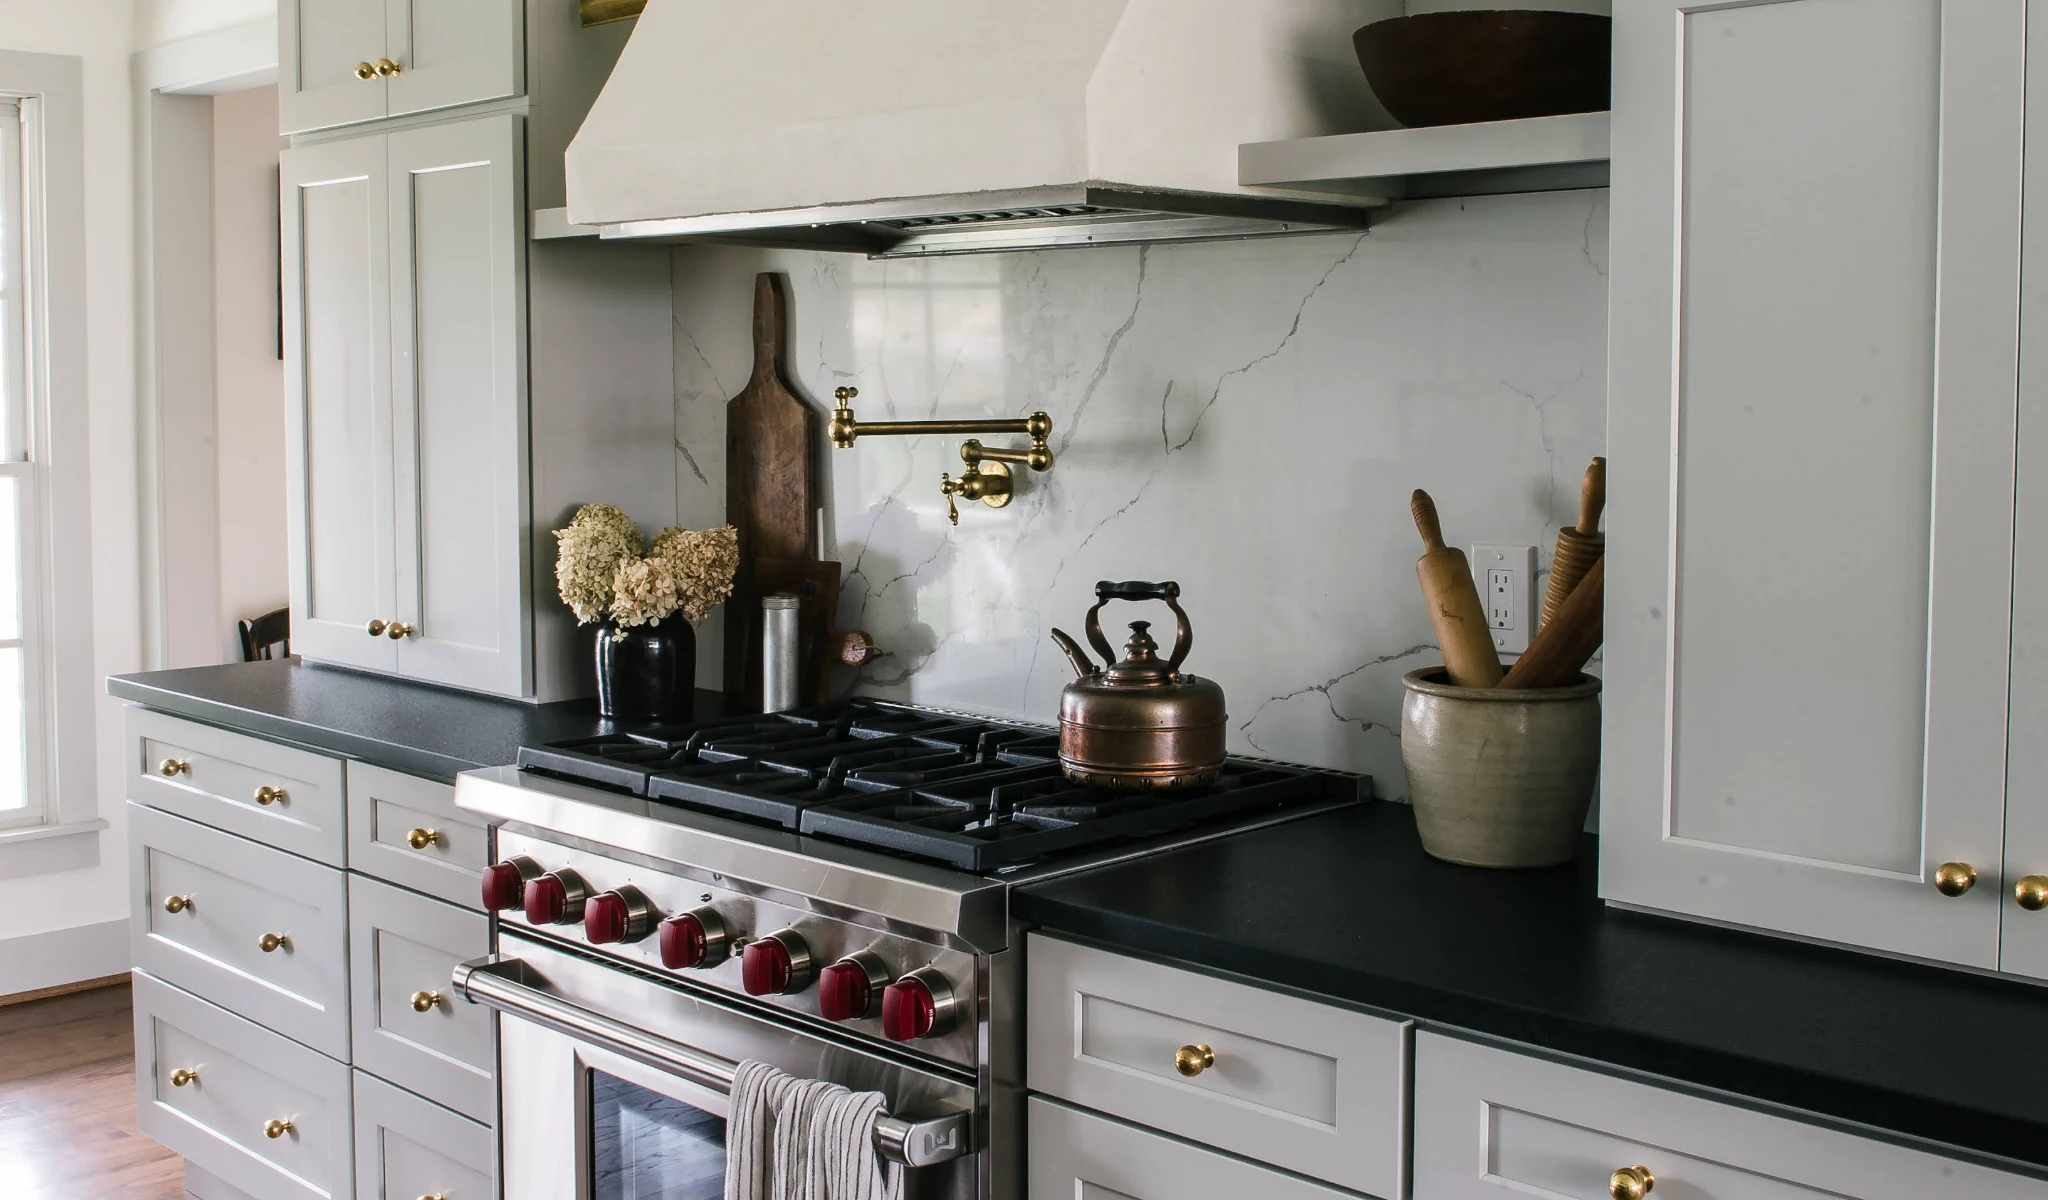 A kitchen with white cabinets and a black stovetop.